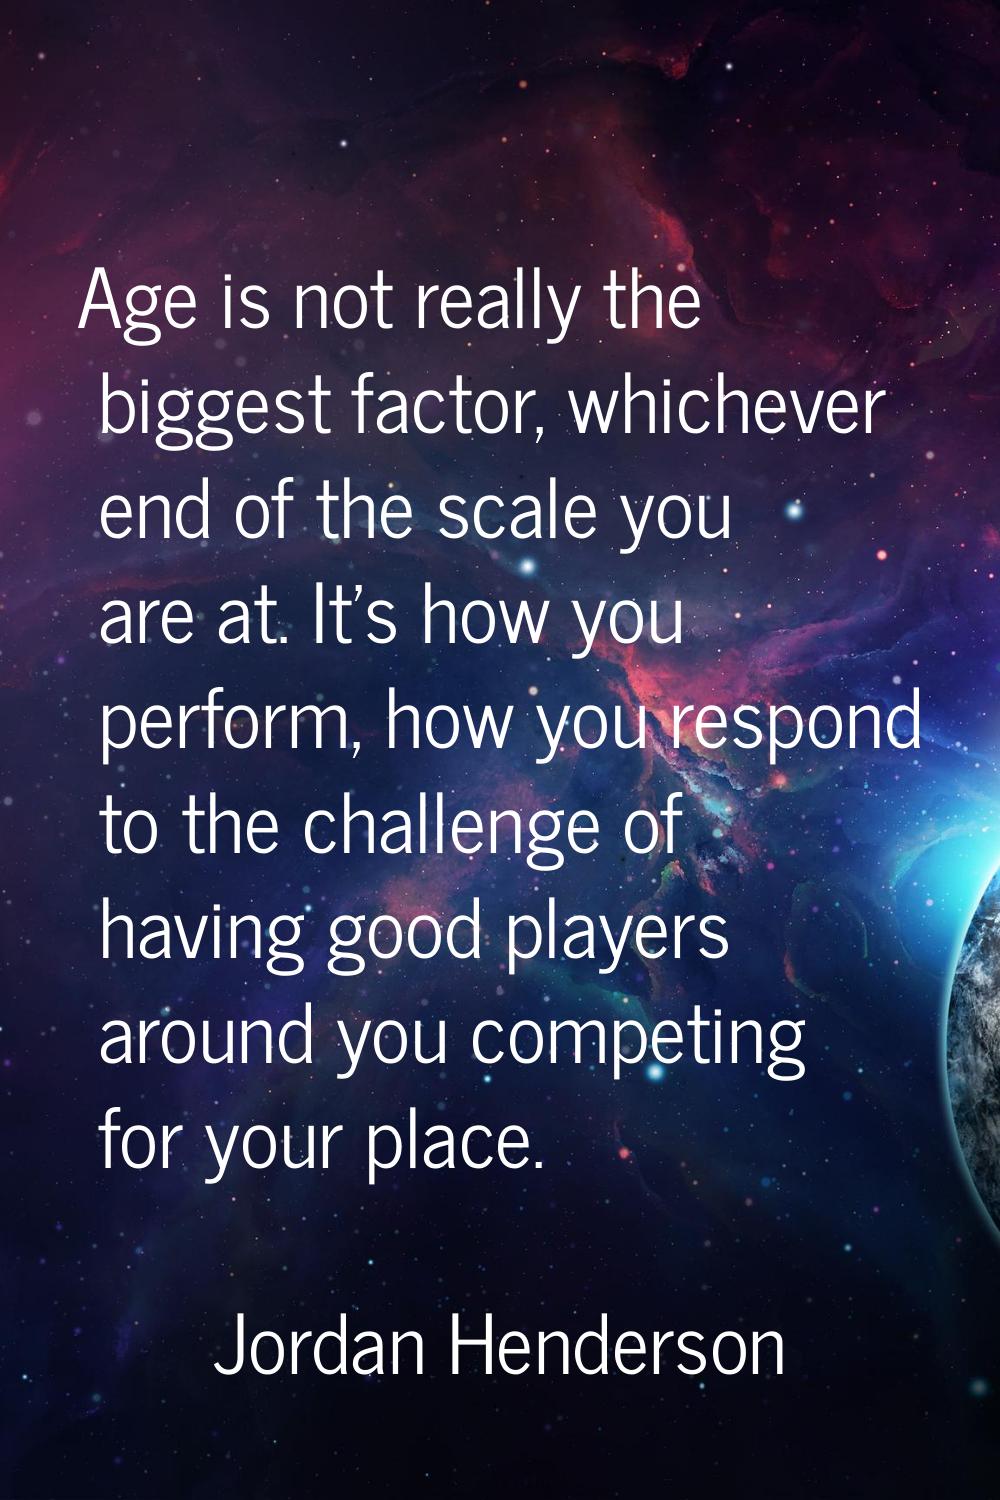 Age is not really the biggest factor, whichever end of the scale you are at. It's how you perform, 